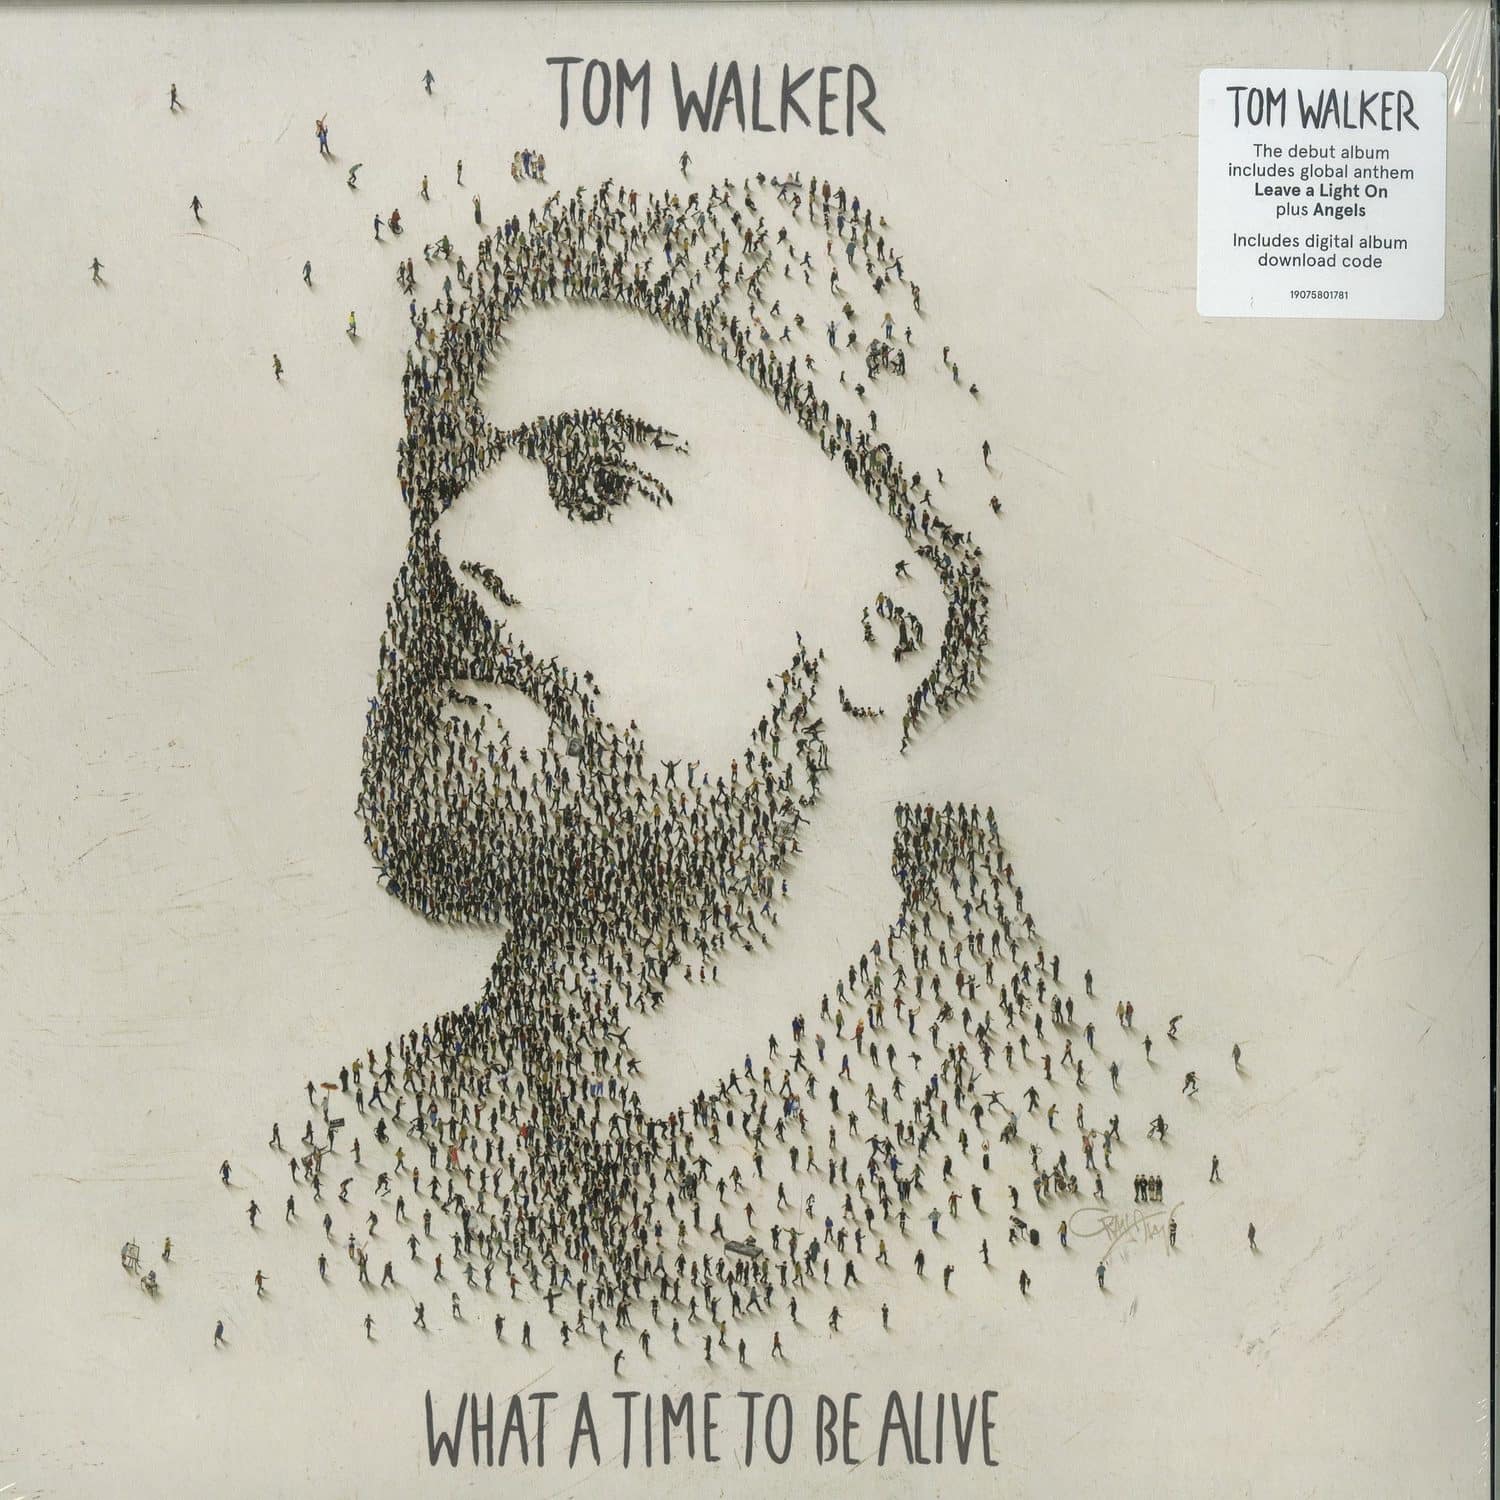 Tom Walker - WHAT A TIME TO BE ALIVE 